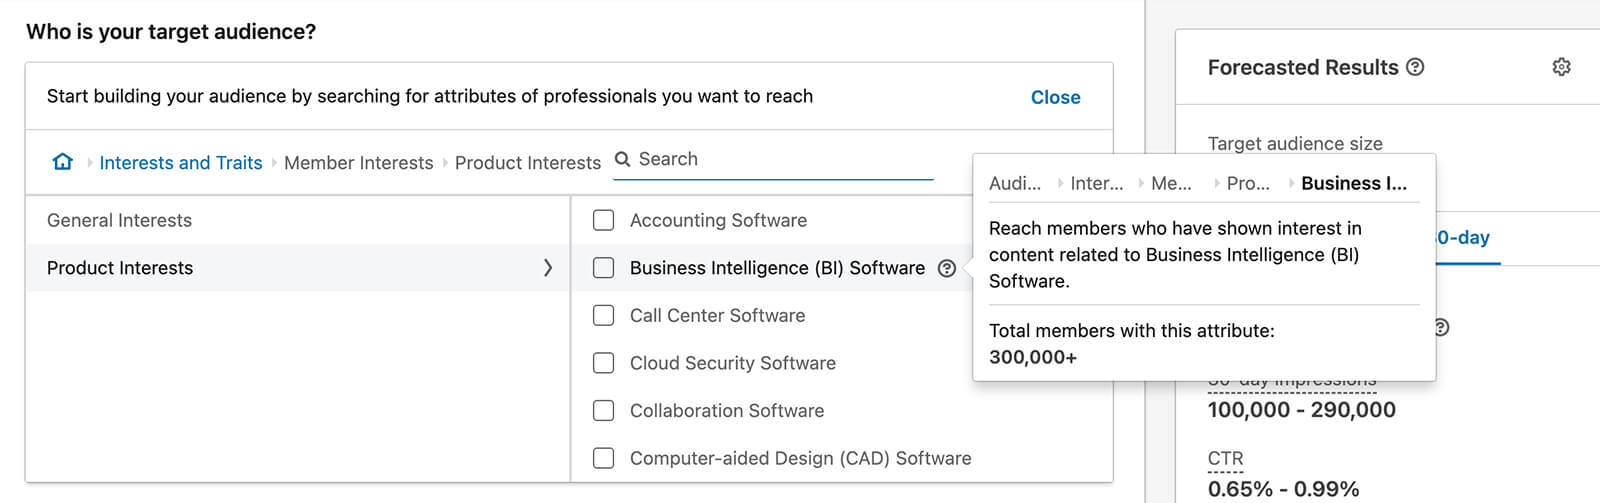 how-to-use-targeting-get-in-front-of-competitor-audiences-on-linkedin-member-interests-product-interest-settings-step-21